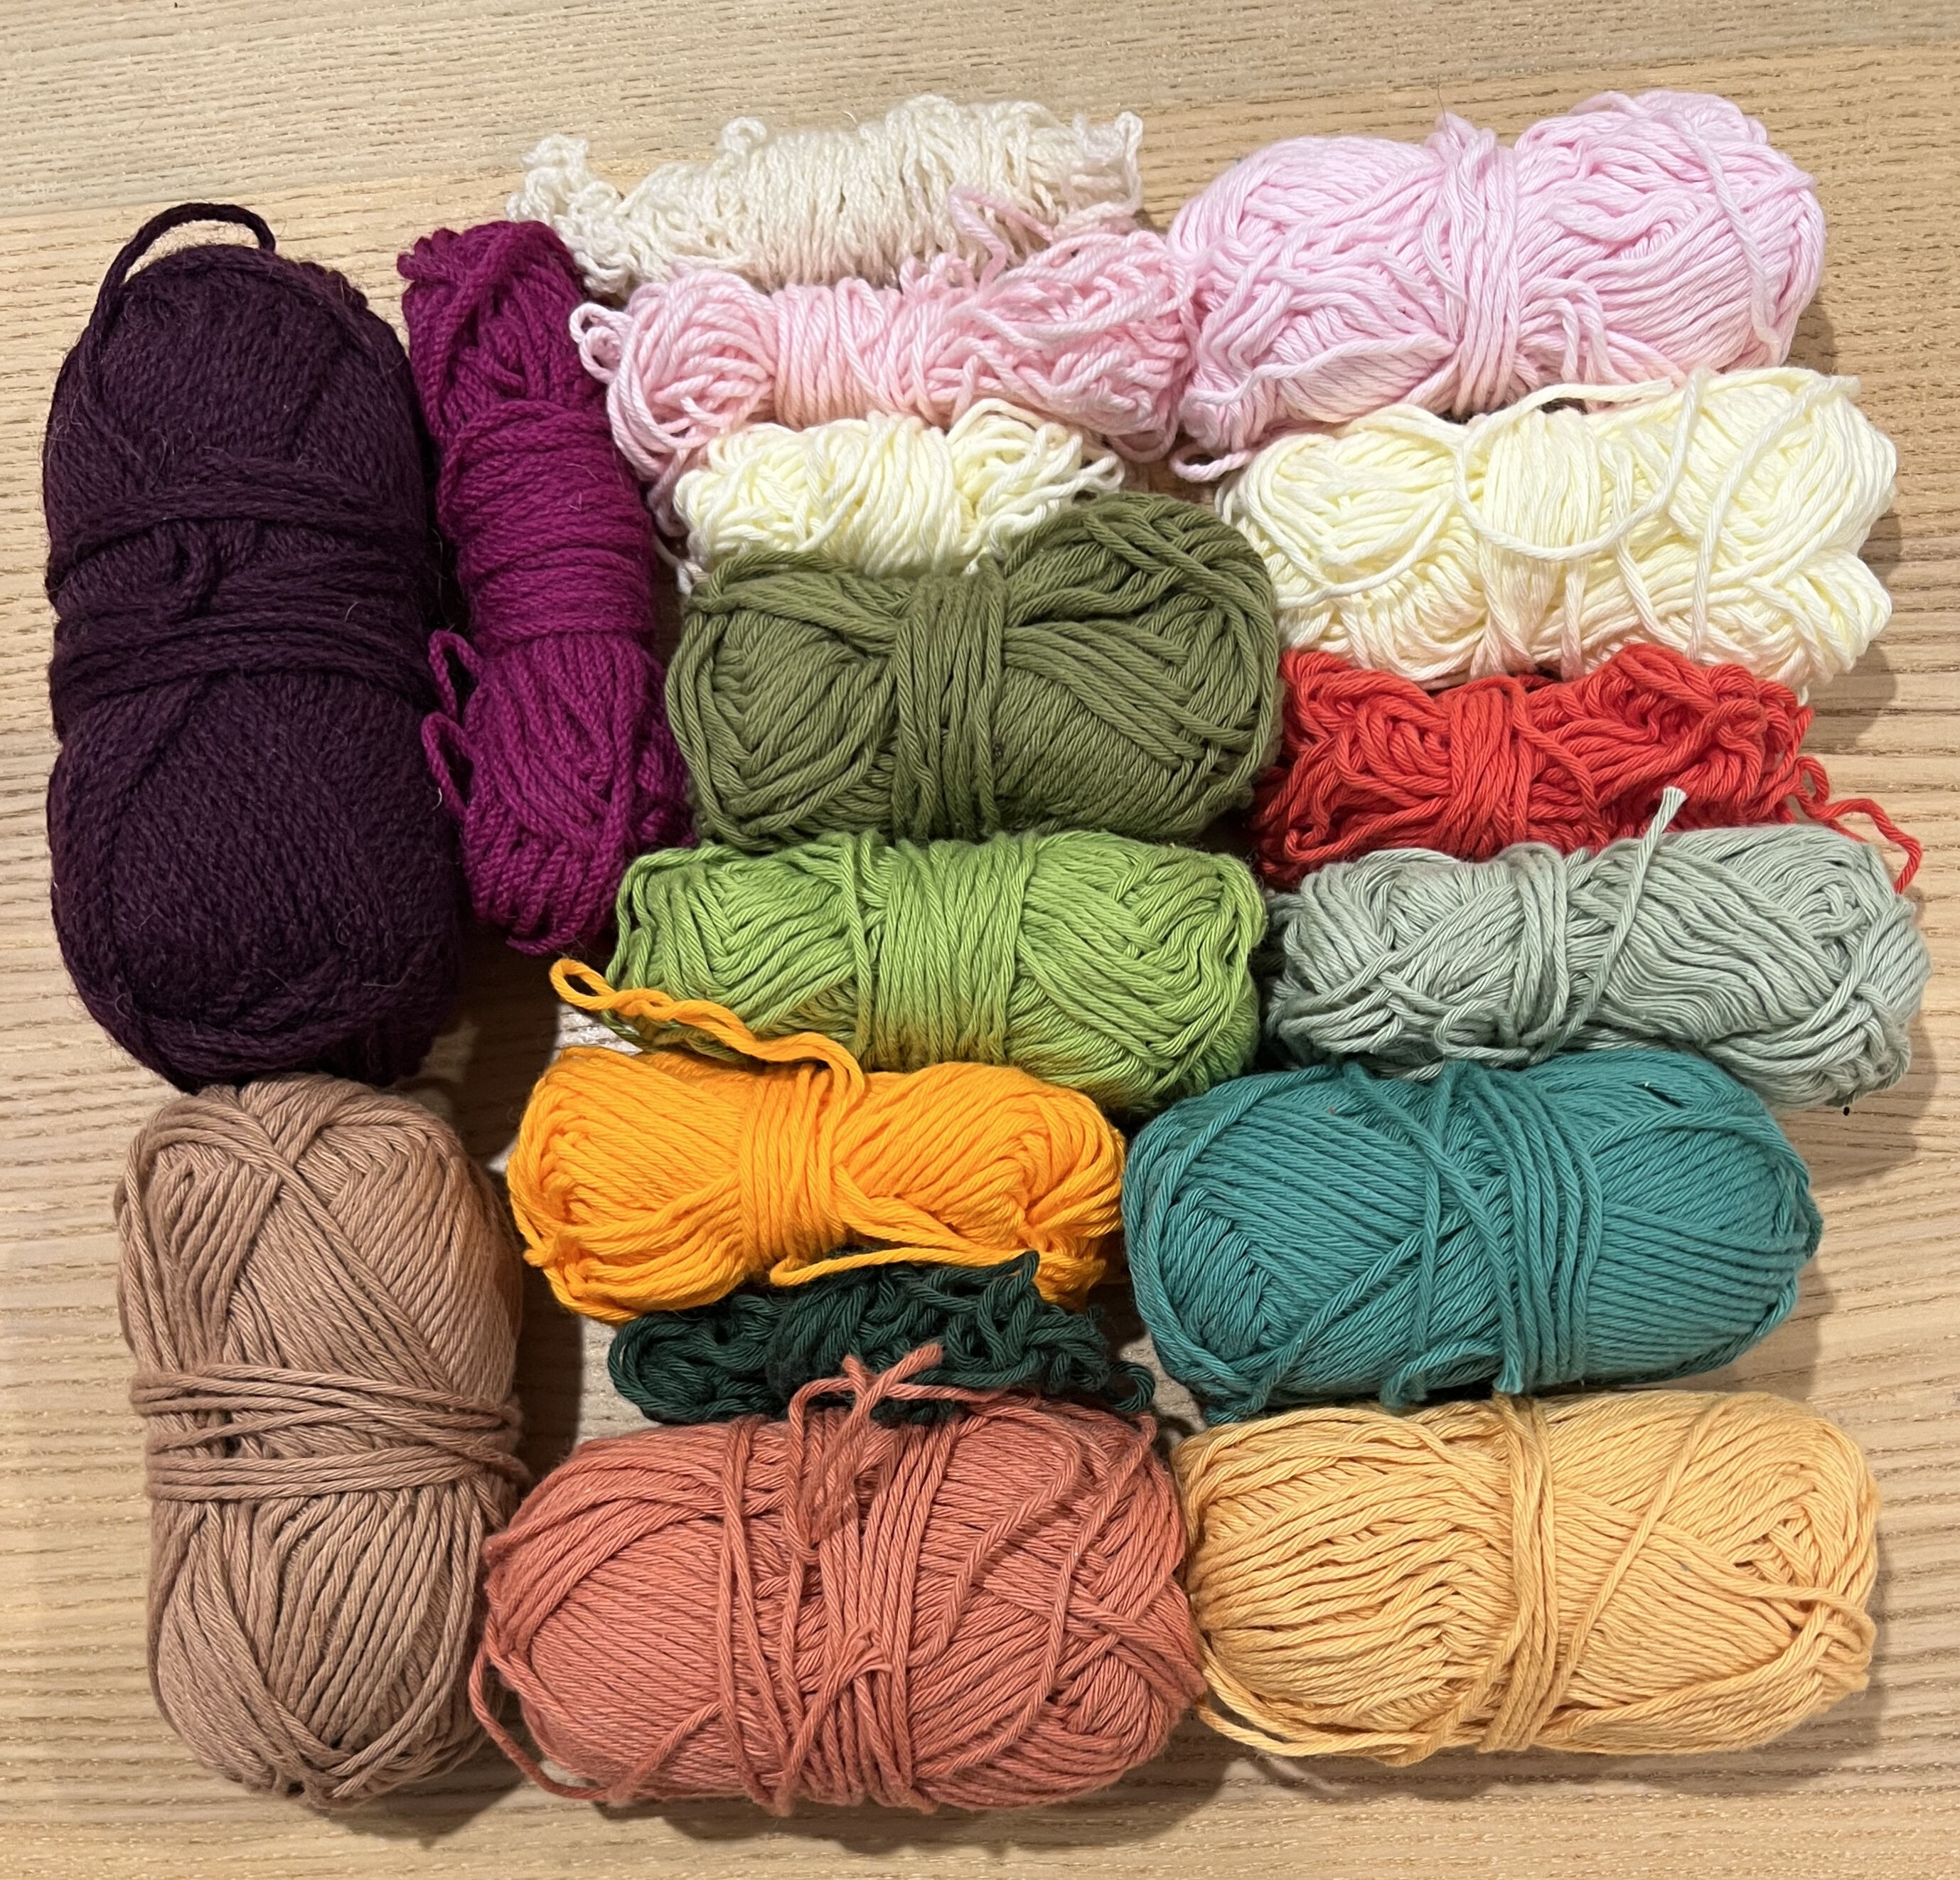 Colour scheme from wool